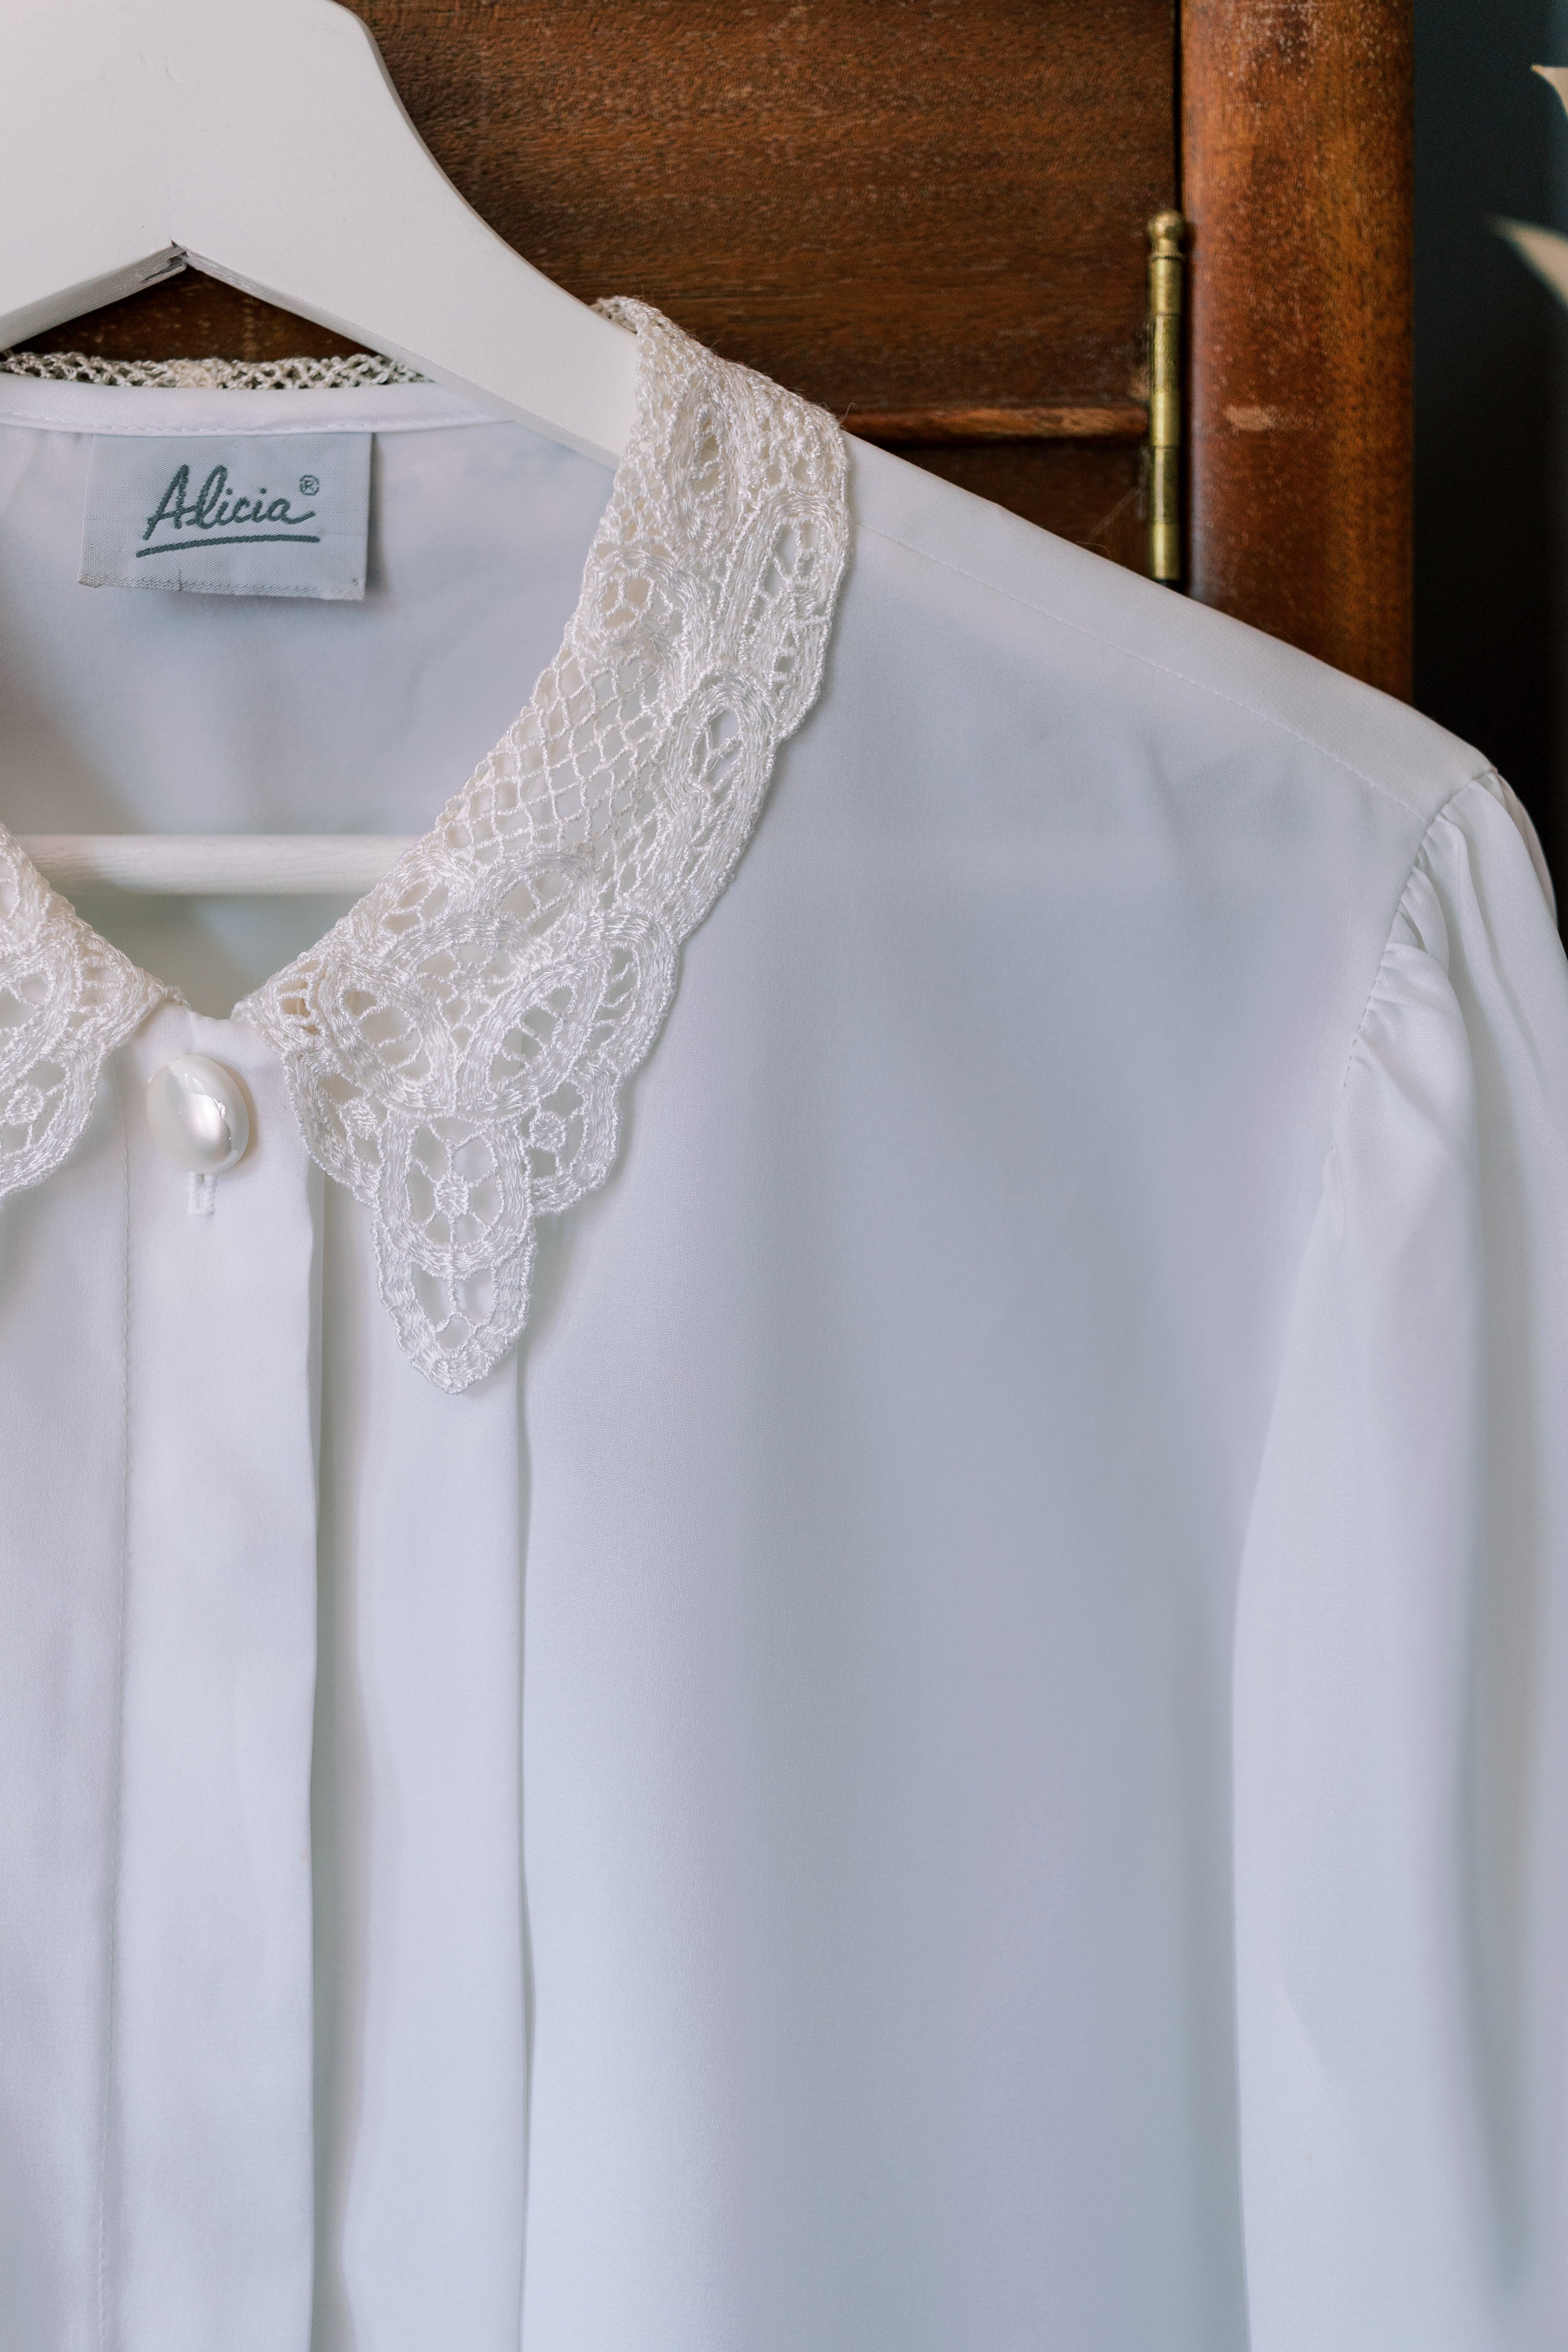 Vintage Crocheted Lace Collar Blouse